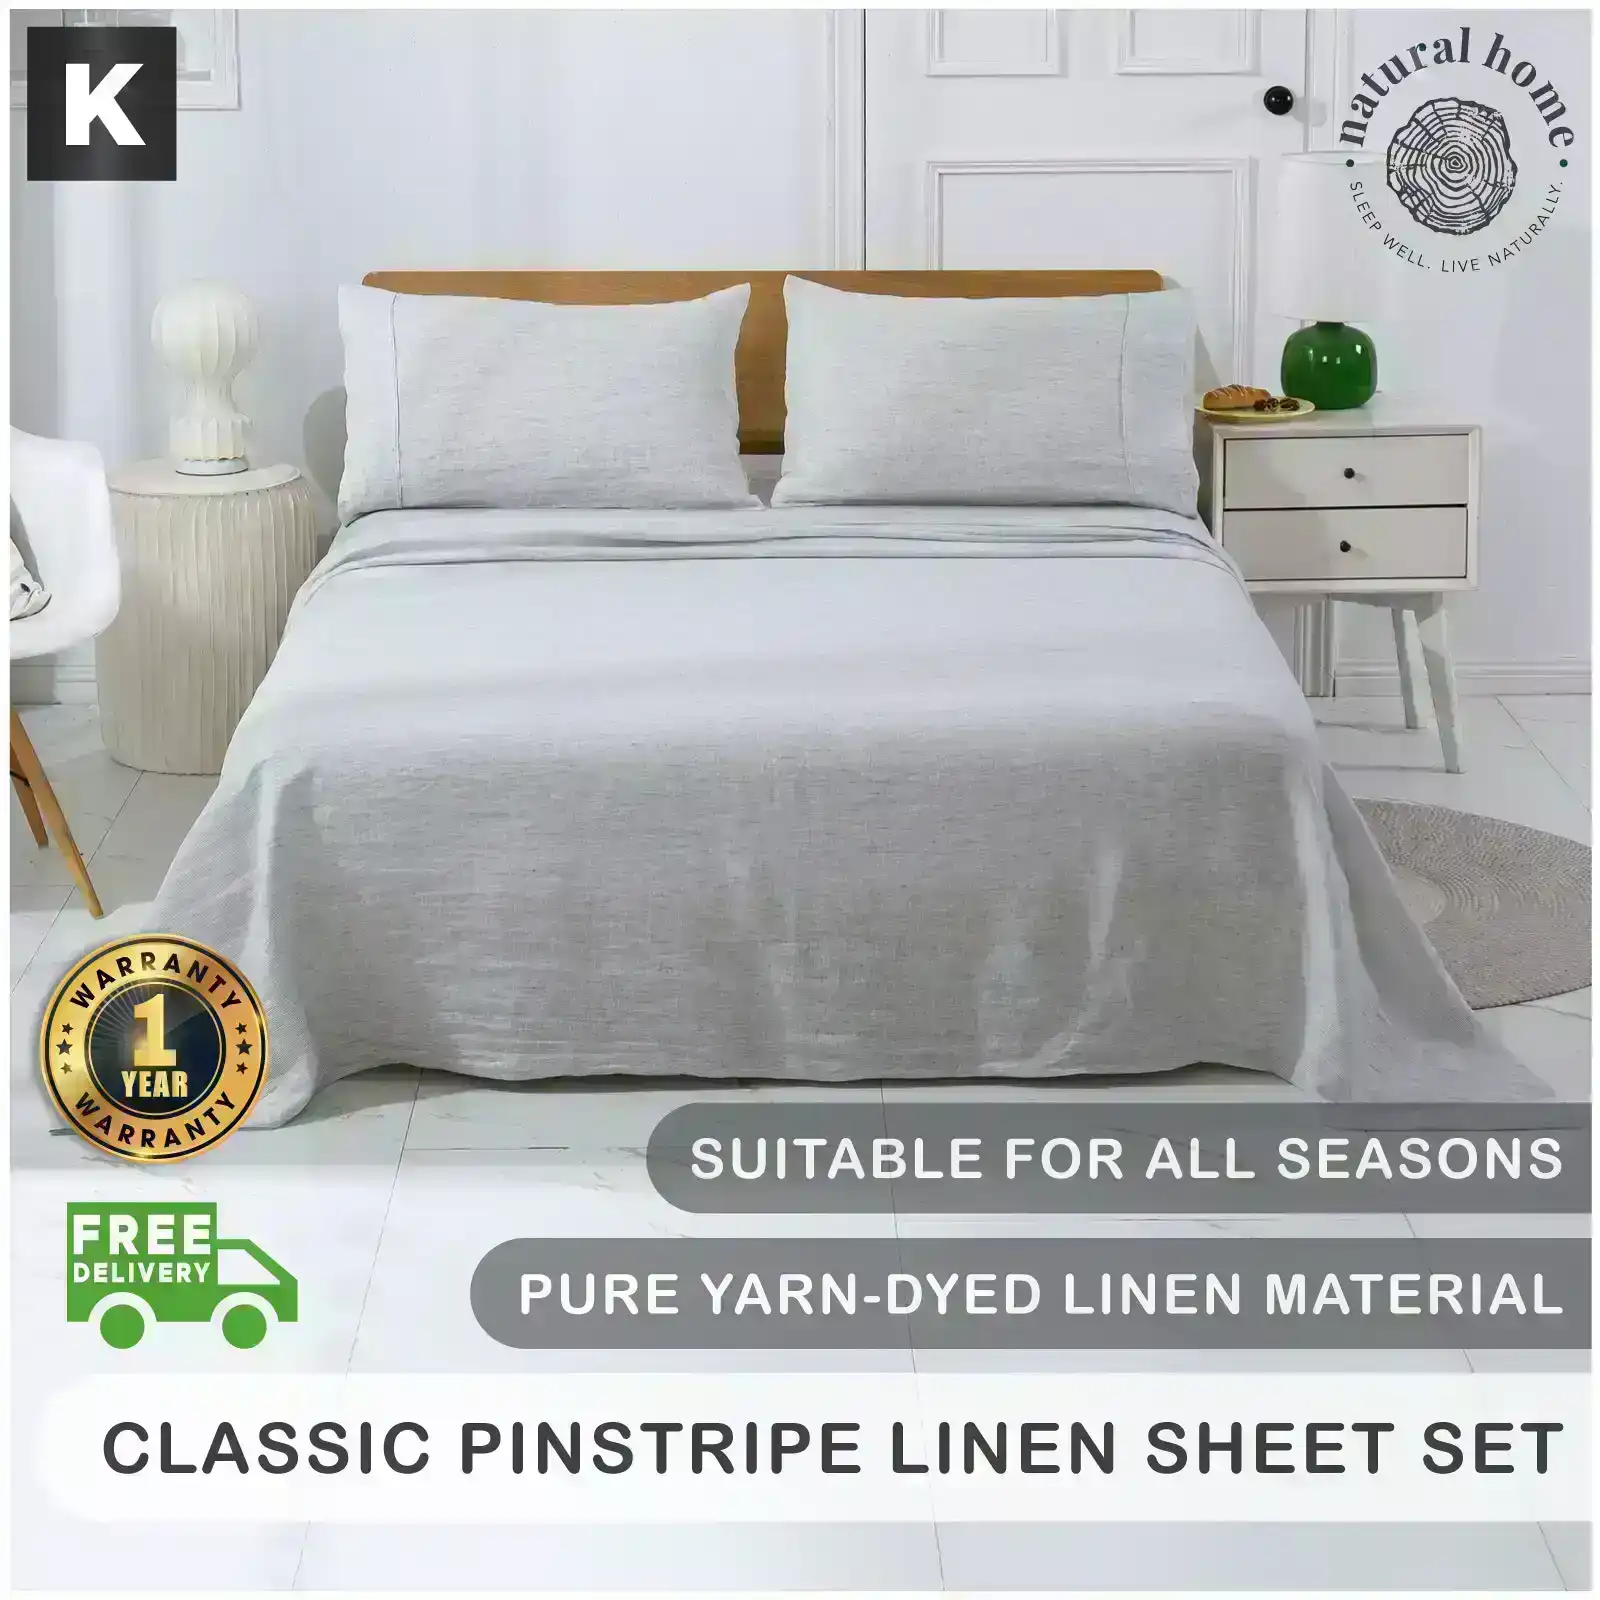 Natural Home Classic Pinstripe Linen Sheet Set White with Dark Pinstripe King Bed